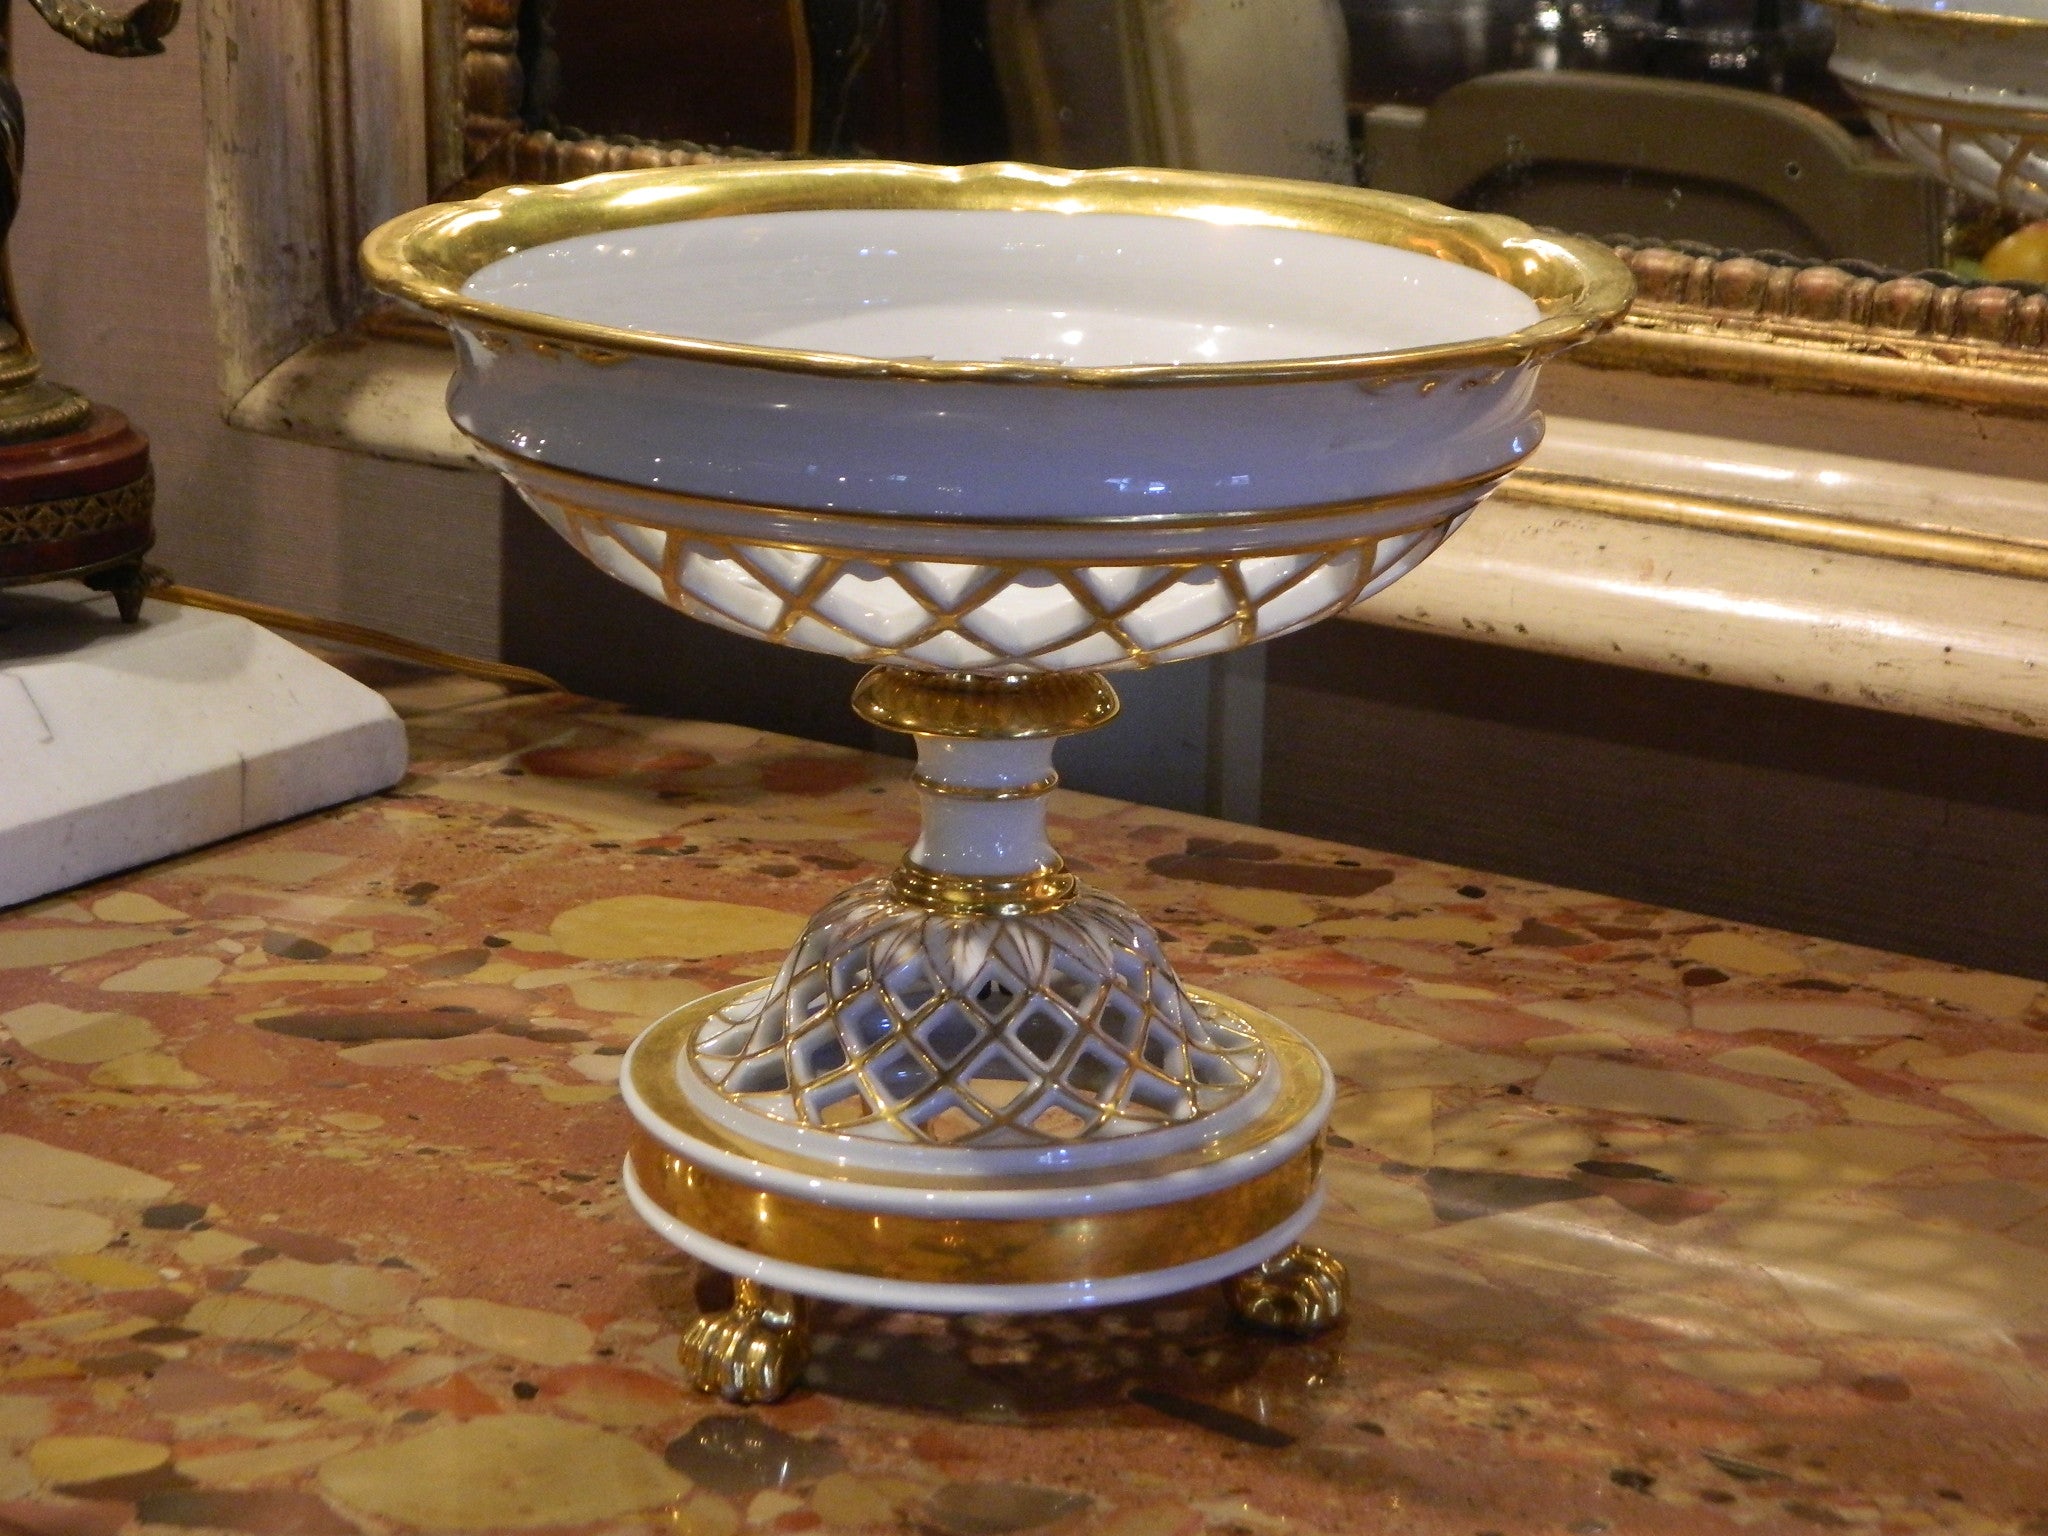 Old Paris Style Porcelain Reticulated Compote with Gold Detailing